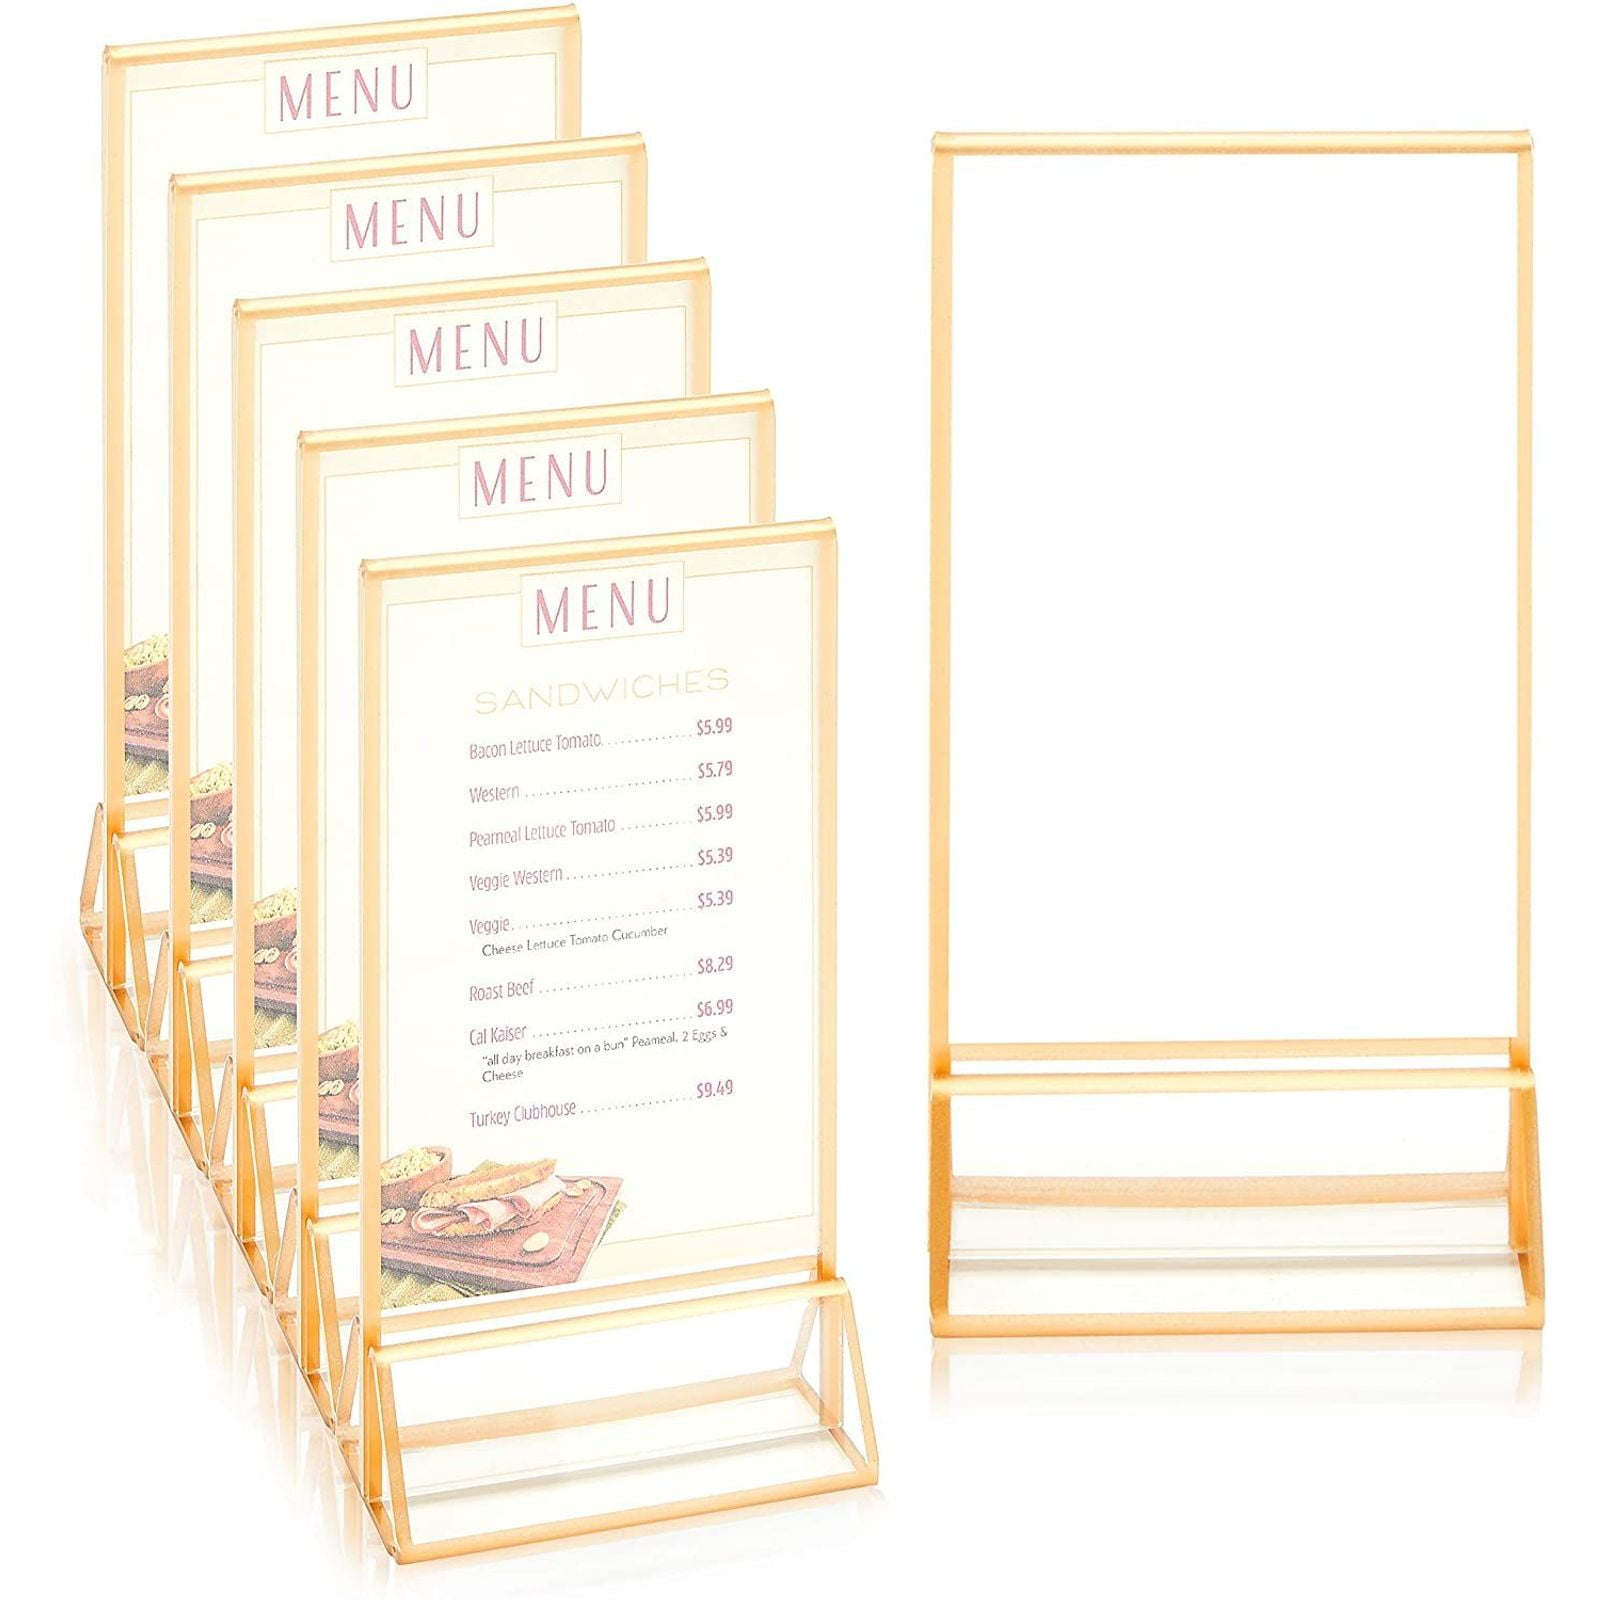 5x7 Quality Plastic Resturant Sign Holder Menu Display Ad Frame Stand Pack of 6 